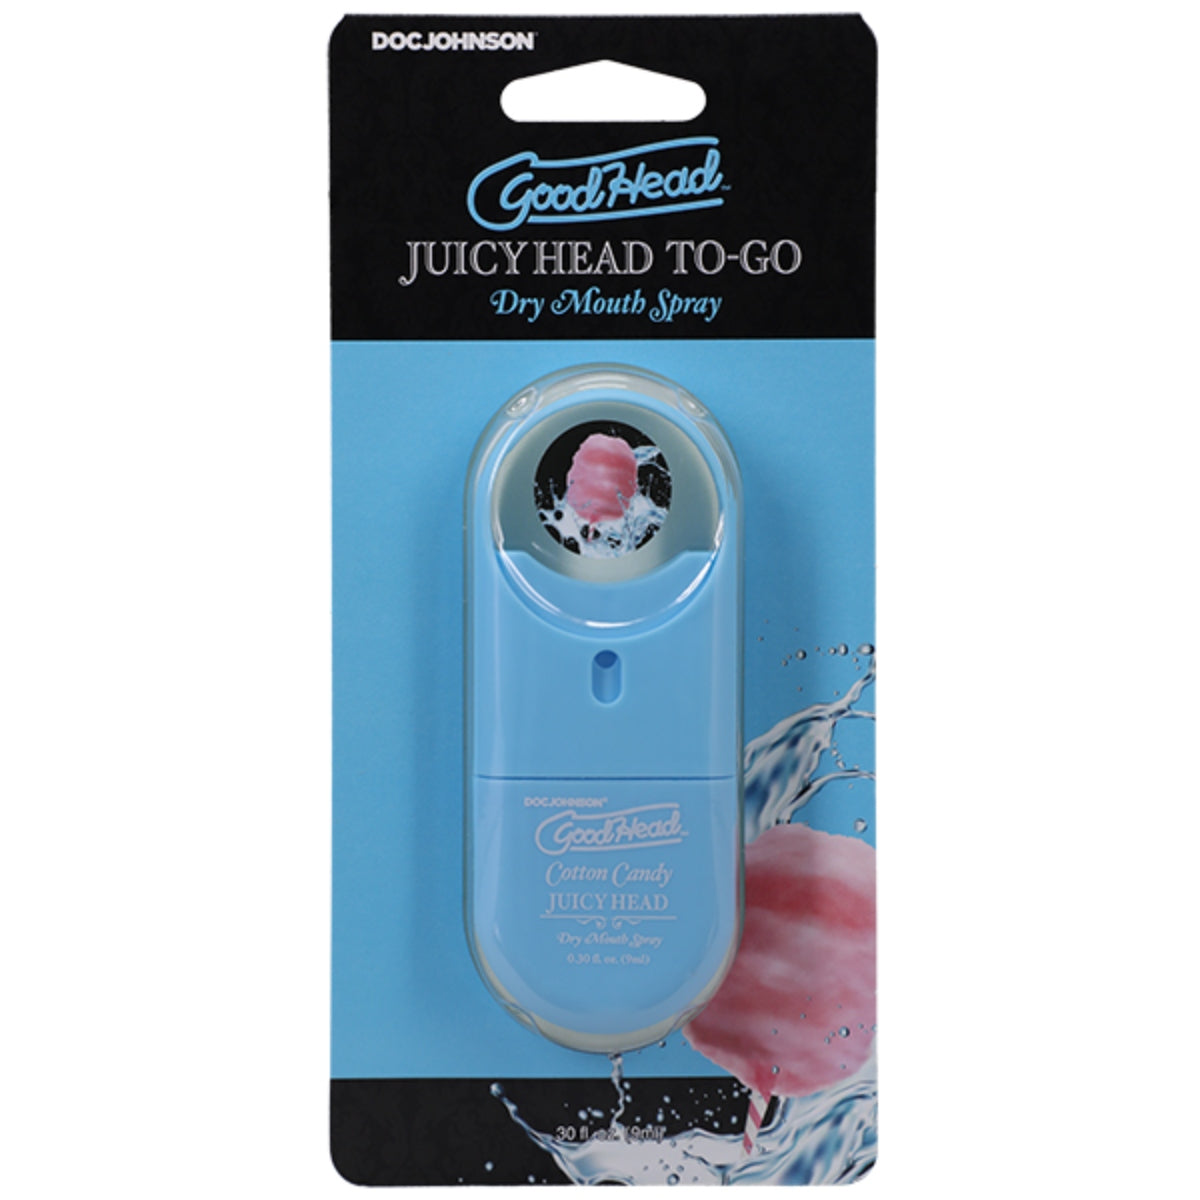 Flavoured Dry Mouth Spray Goodhead | Juicy Head Dry Mouth Spray To-Go Cotton Candy 0.30 fl oz    | Awaken My Sexuality